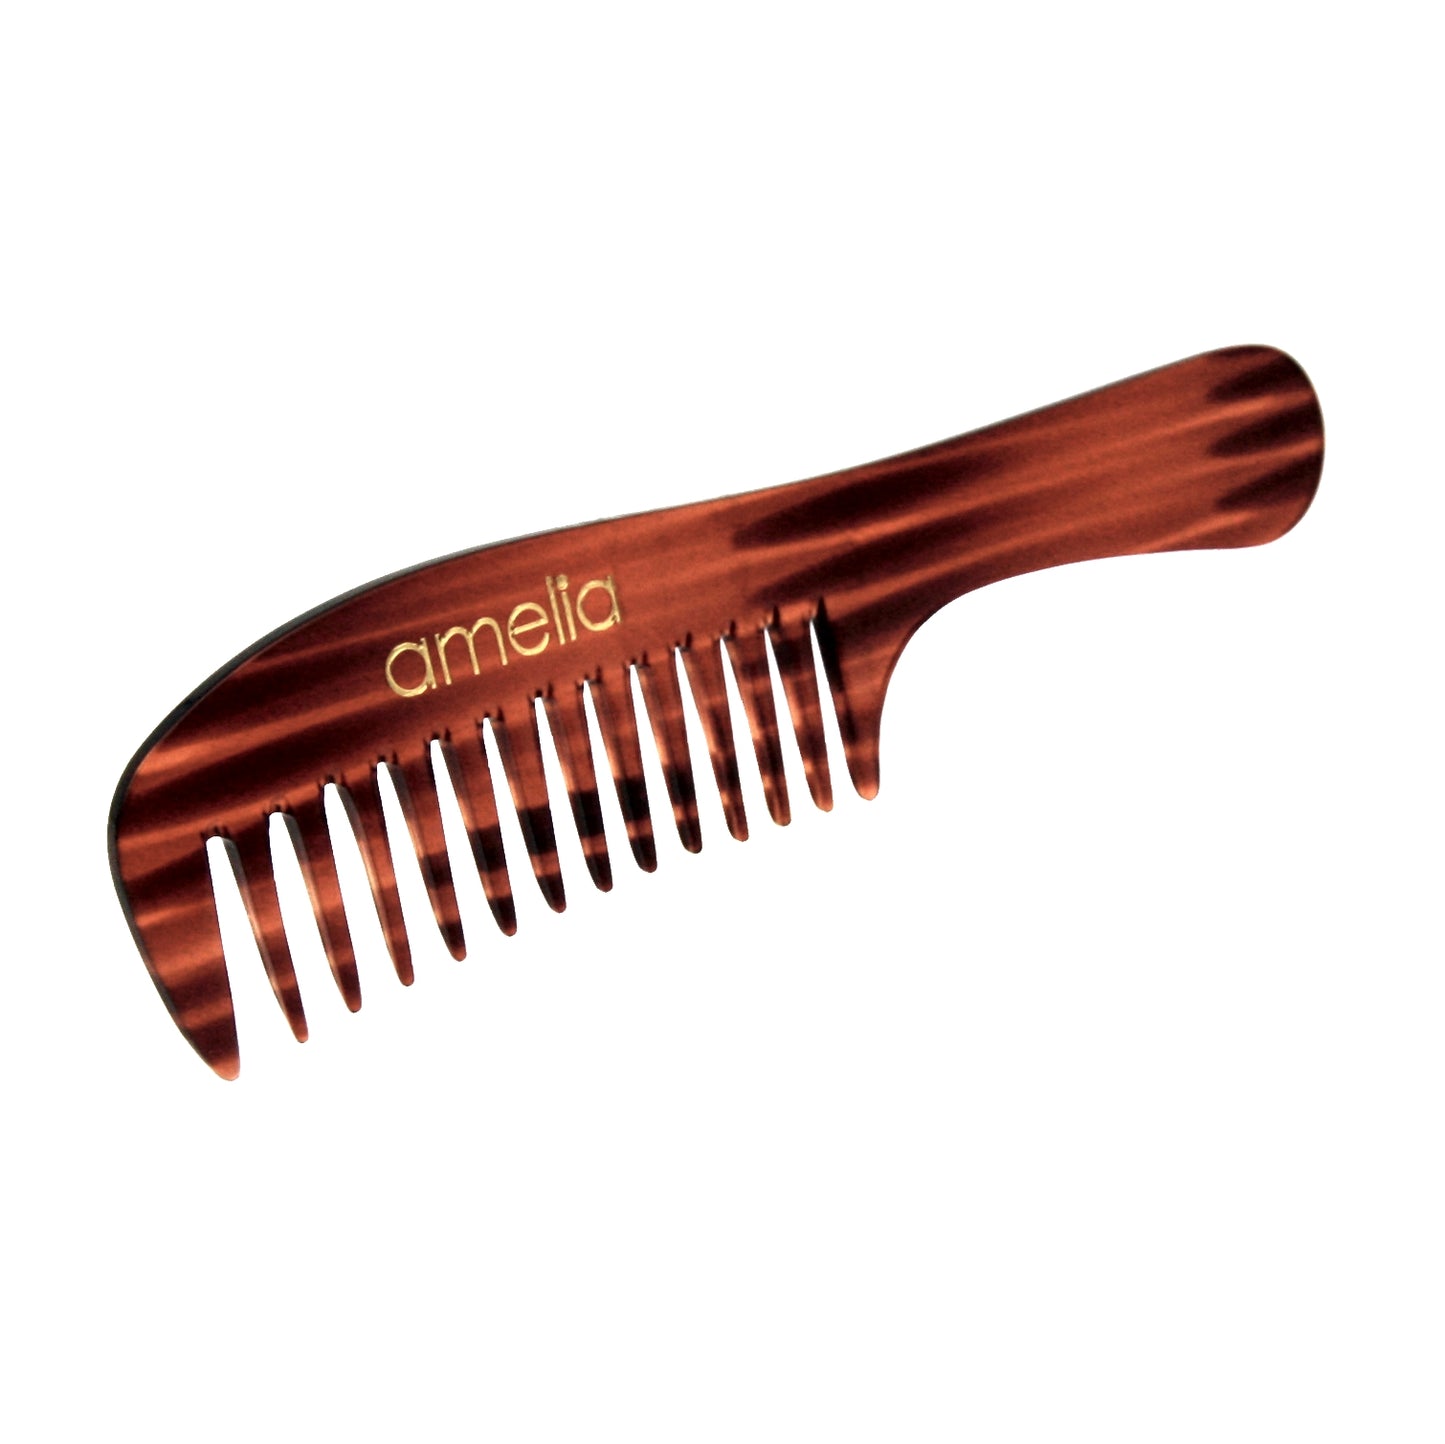 8in Cellulose Acetate Handle Comb - Tortoise Shell Color